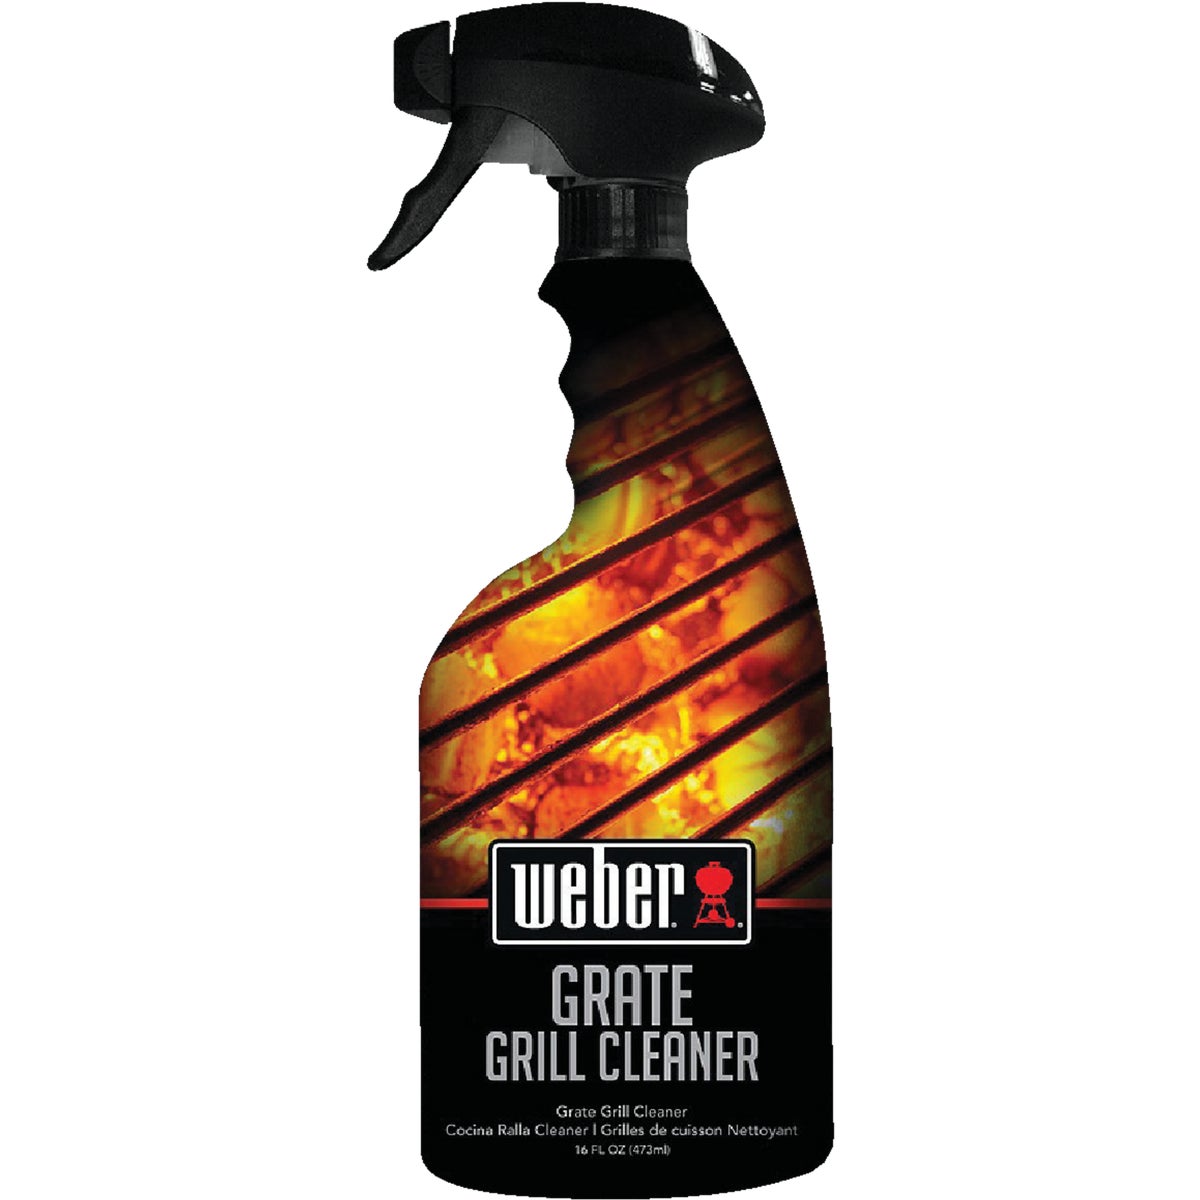 Item 800502, The Weber Grate Grill Cleaner is a simple and safe, yet powerful cleaner 